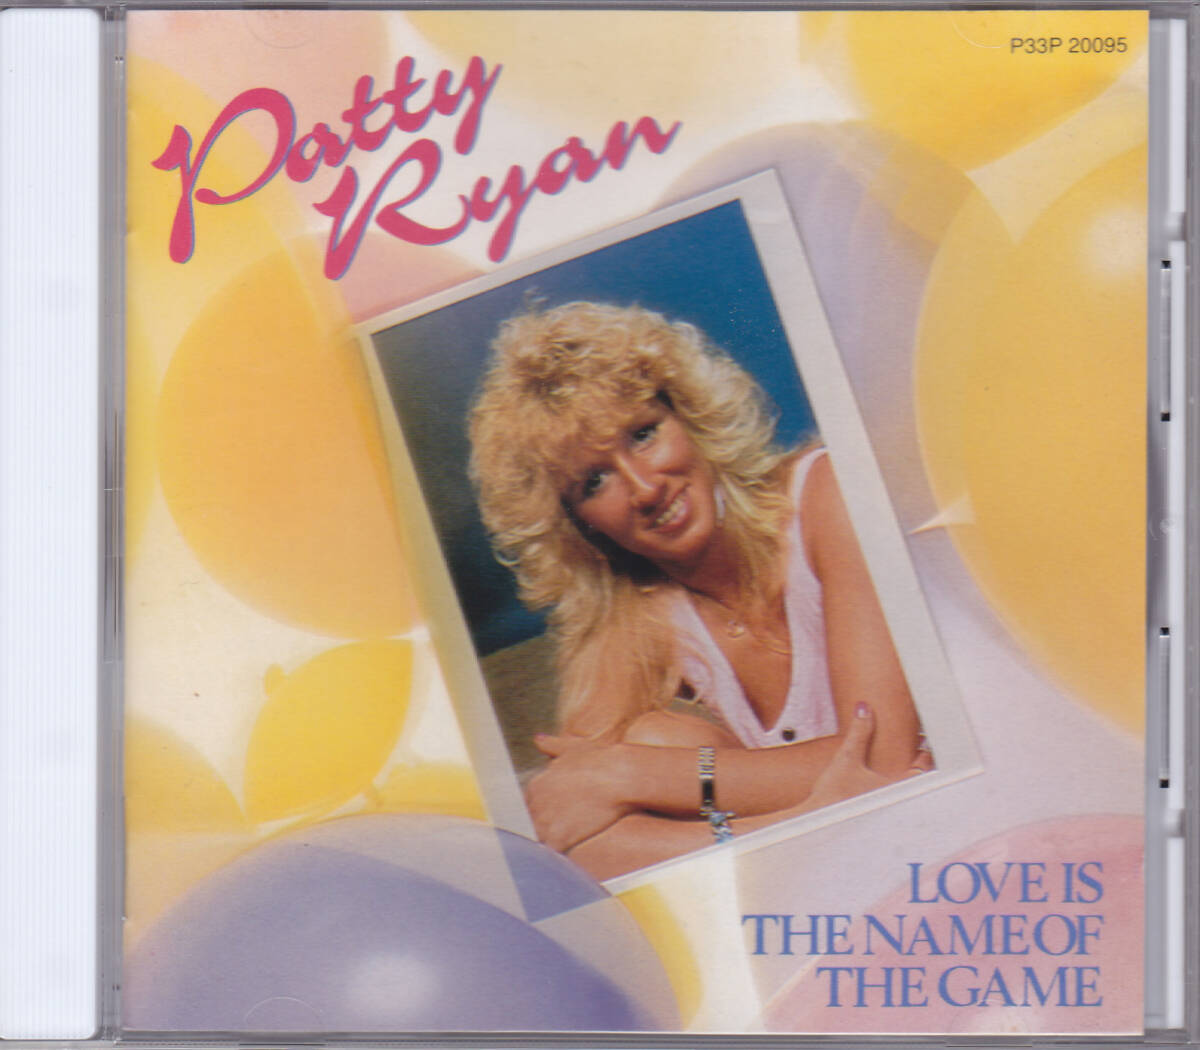 CD パティ・ライアン - ユア・マイ・ラヴ - 国内盤 P33P-20095 A1E21 LOVE IS THE NAME OF THE GAME PATTY RYANの画像1